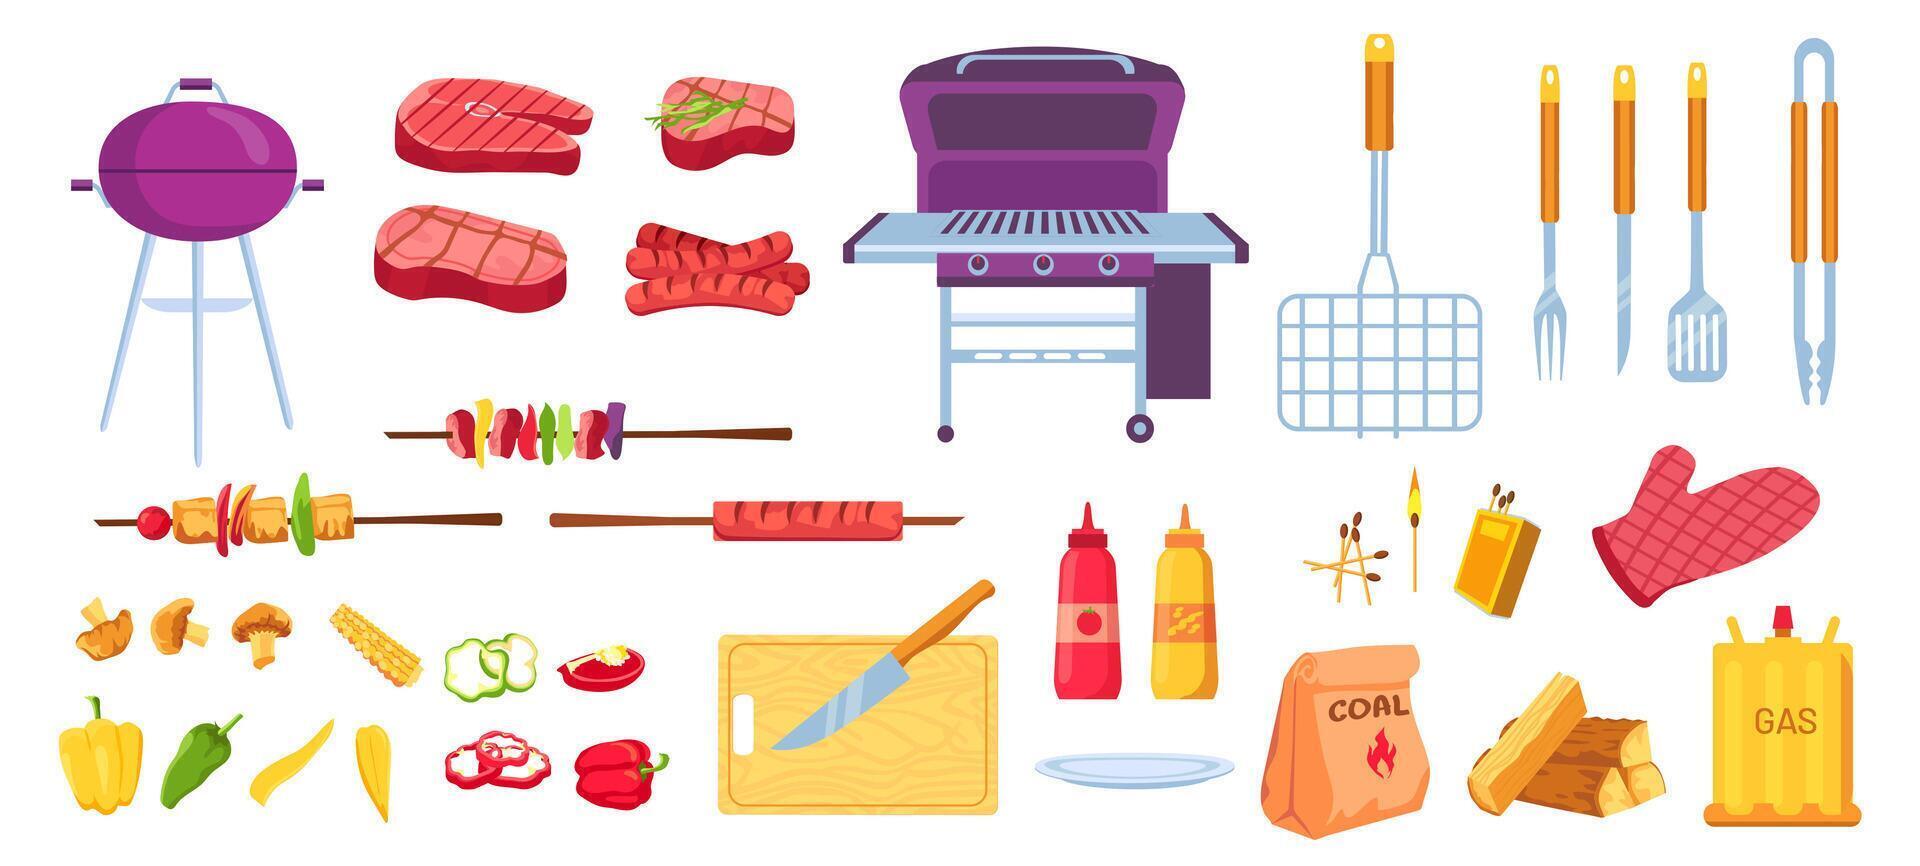 Cartoon grill and barbecue. Grilled food meat, sausages and vegetables. Cooking tools, grid, knife and skewer. Bbq picnic party vector set